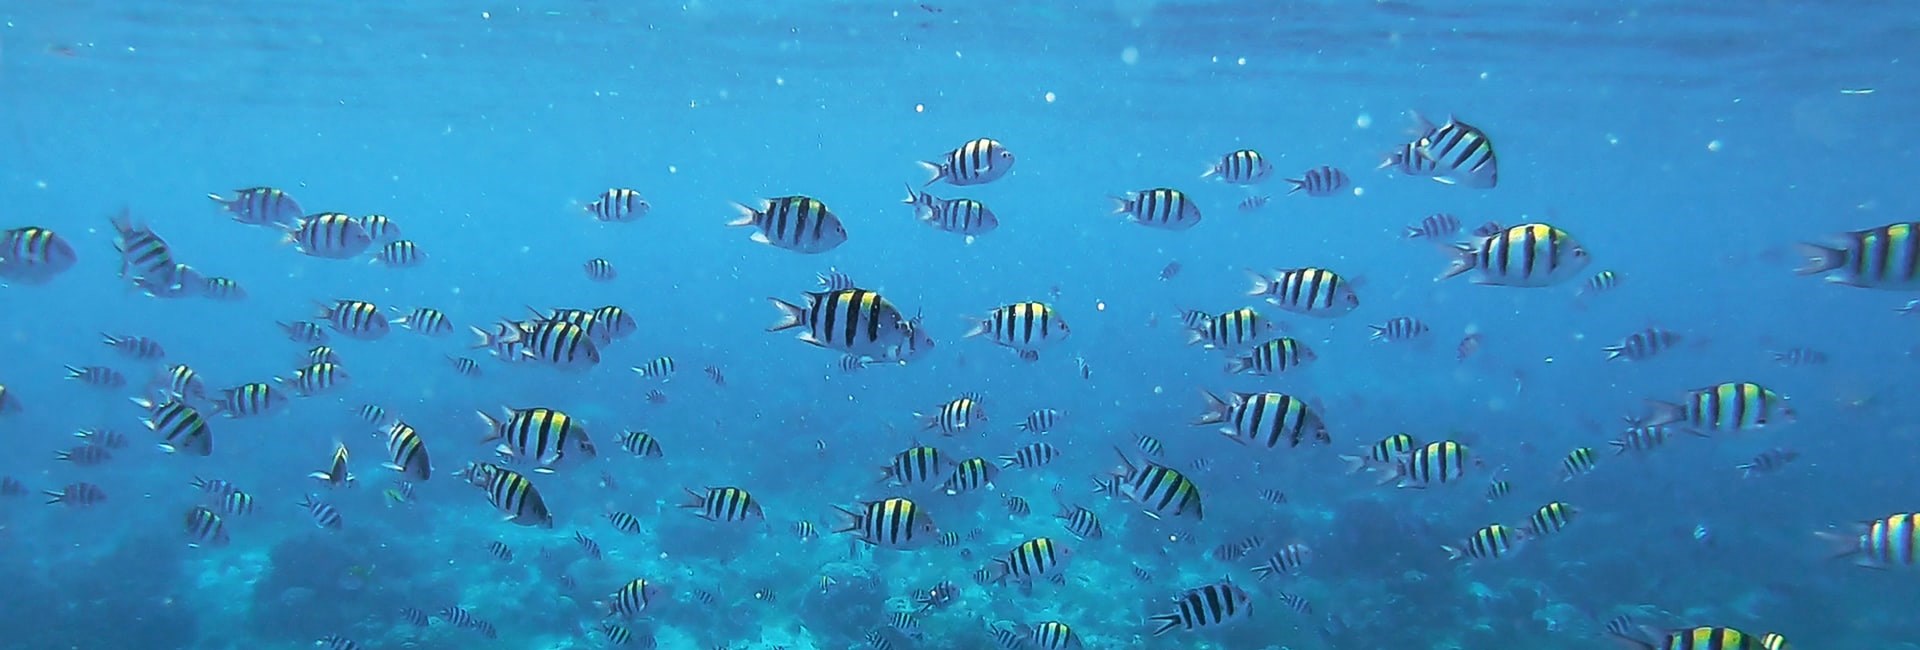 School Of Tropical Fish In Clear Blue Sea